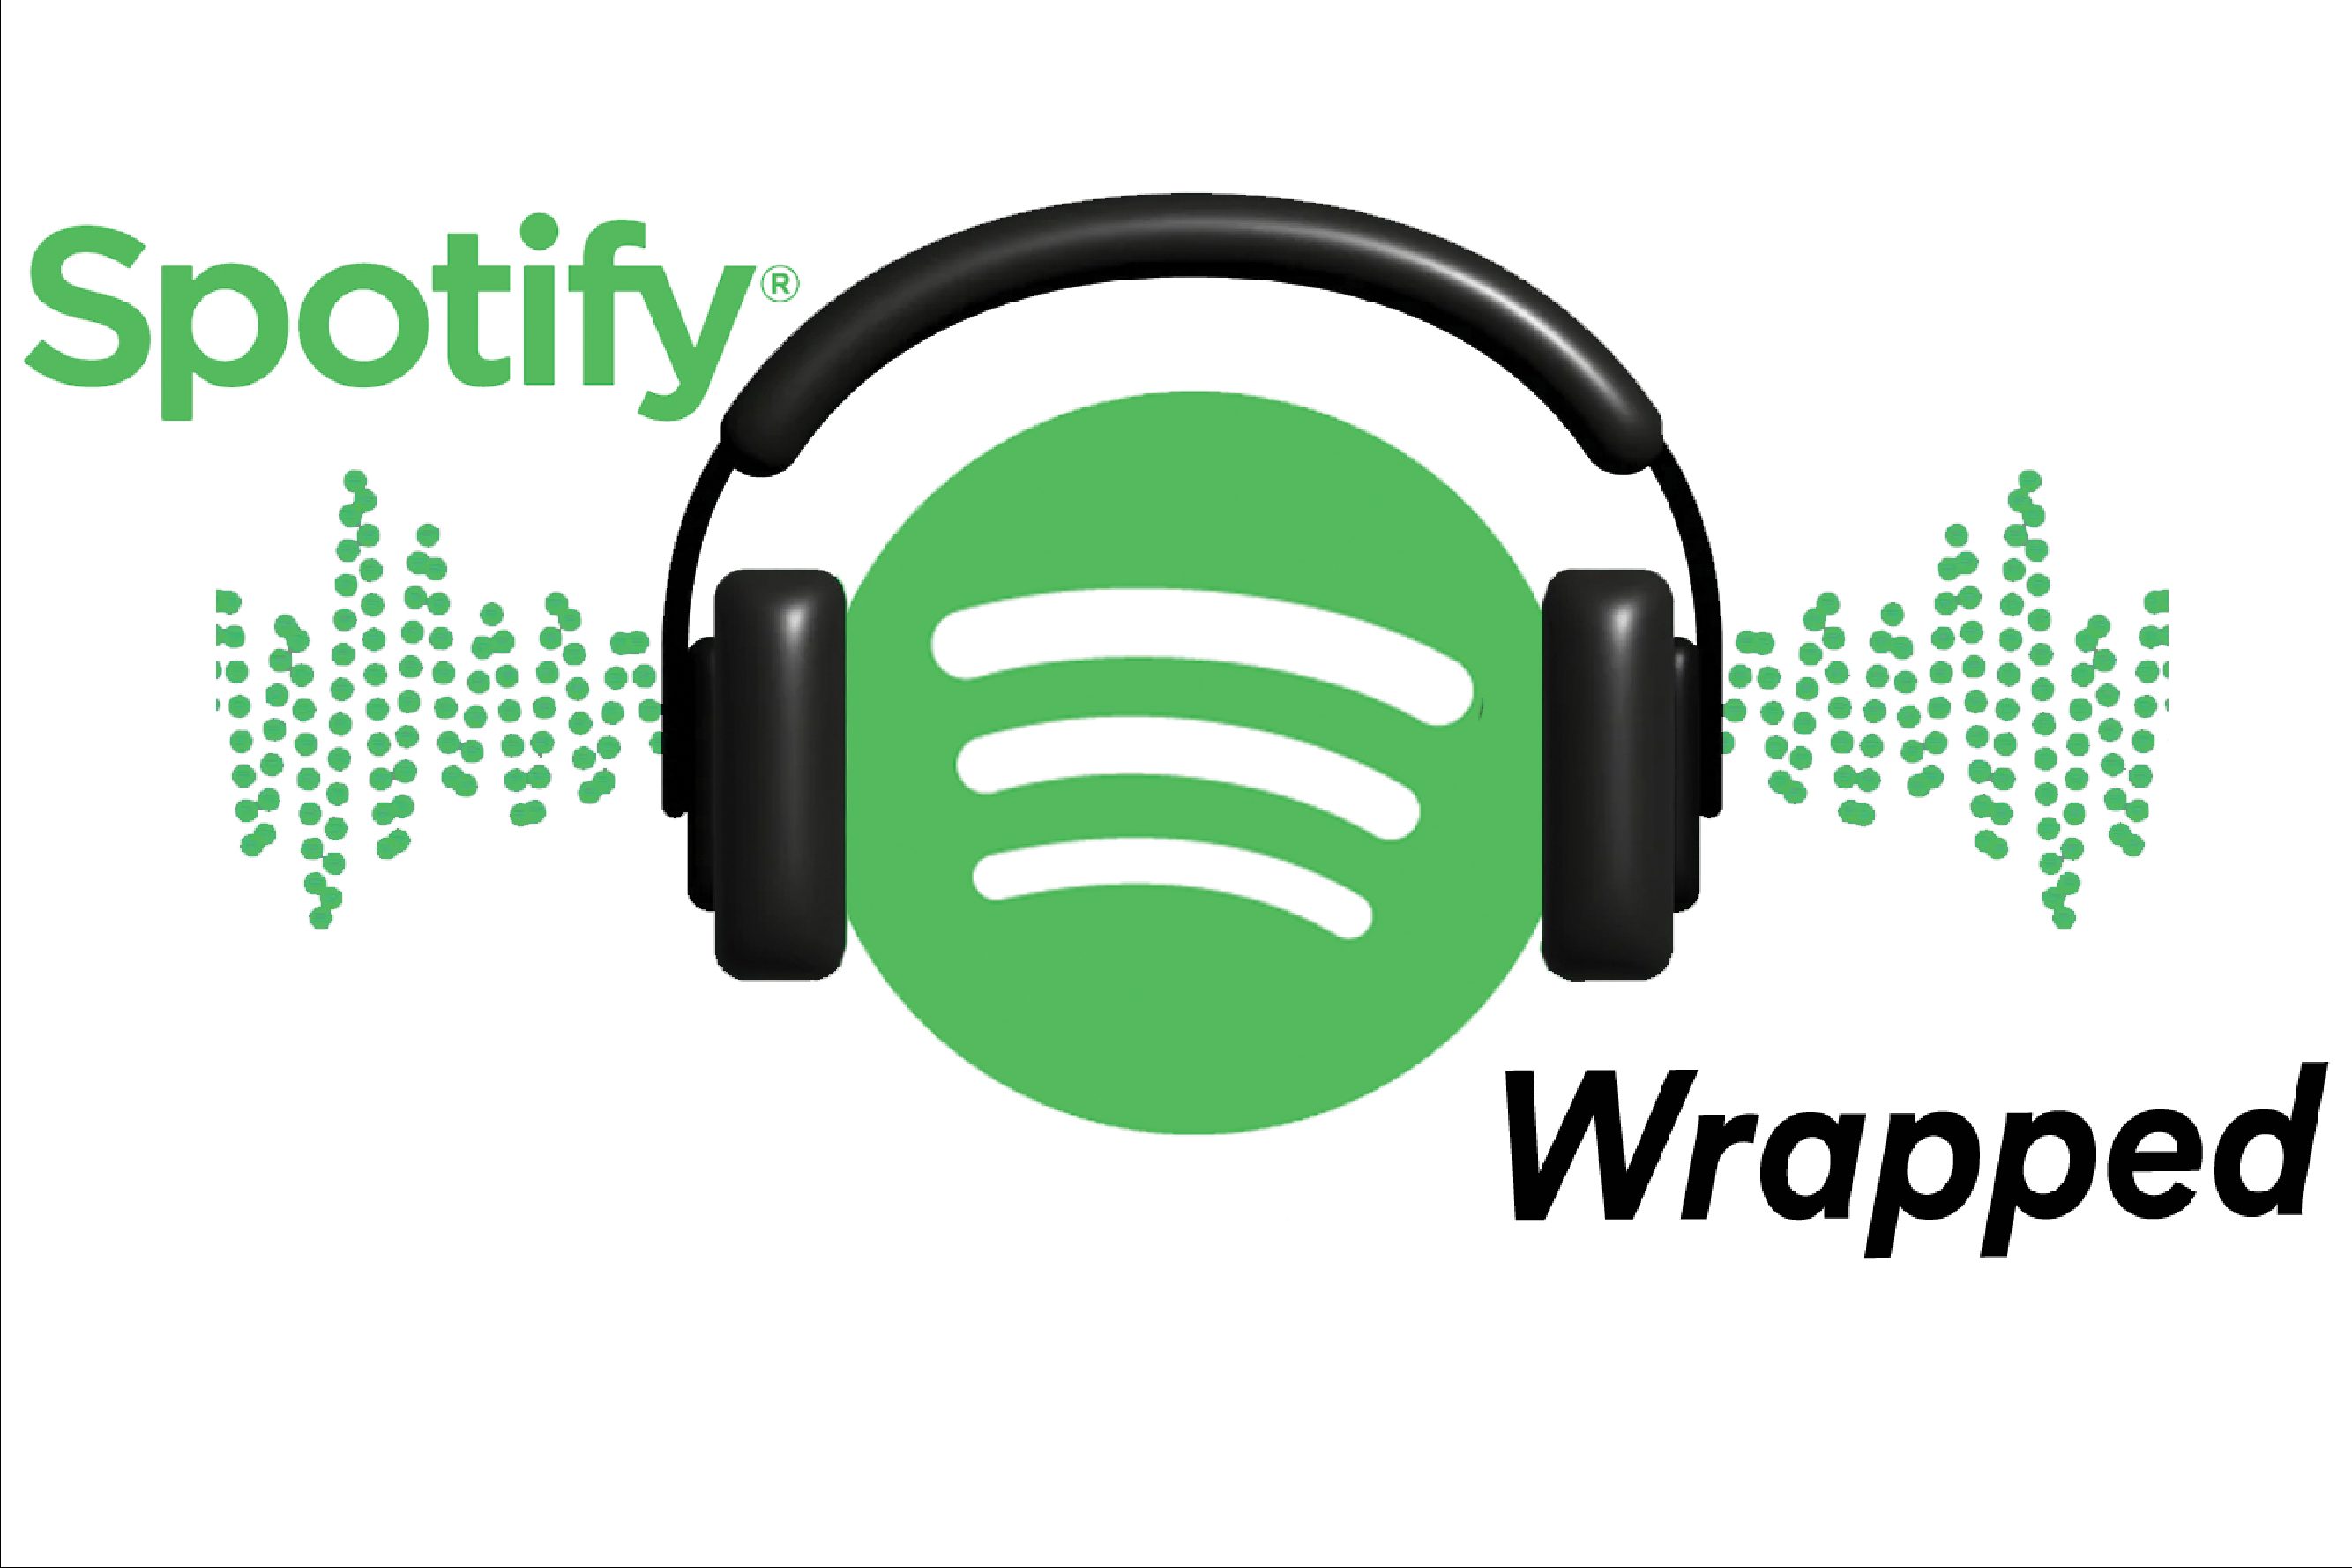 Spotify Wrapped functions as masterpiece of marketing